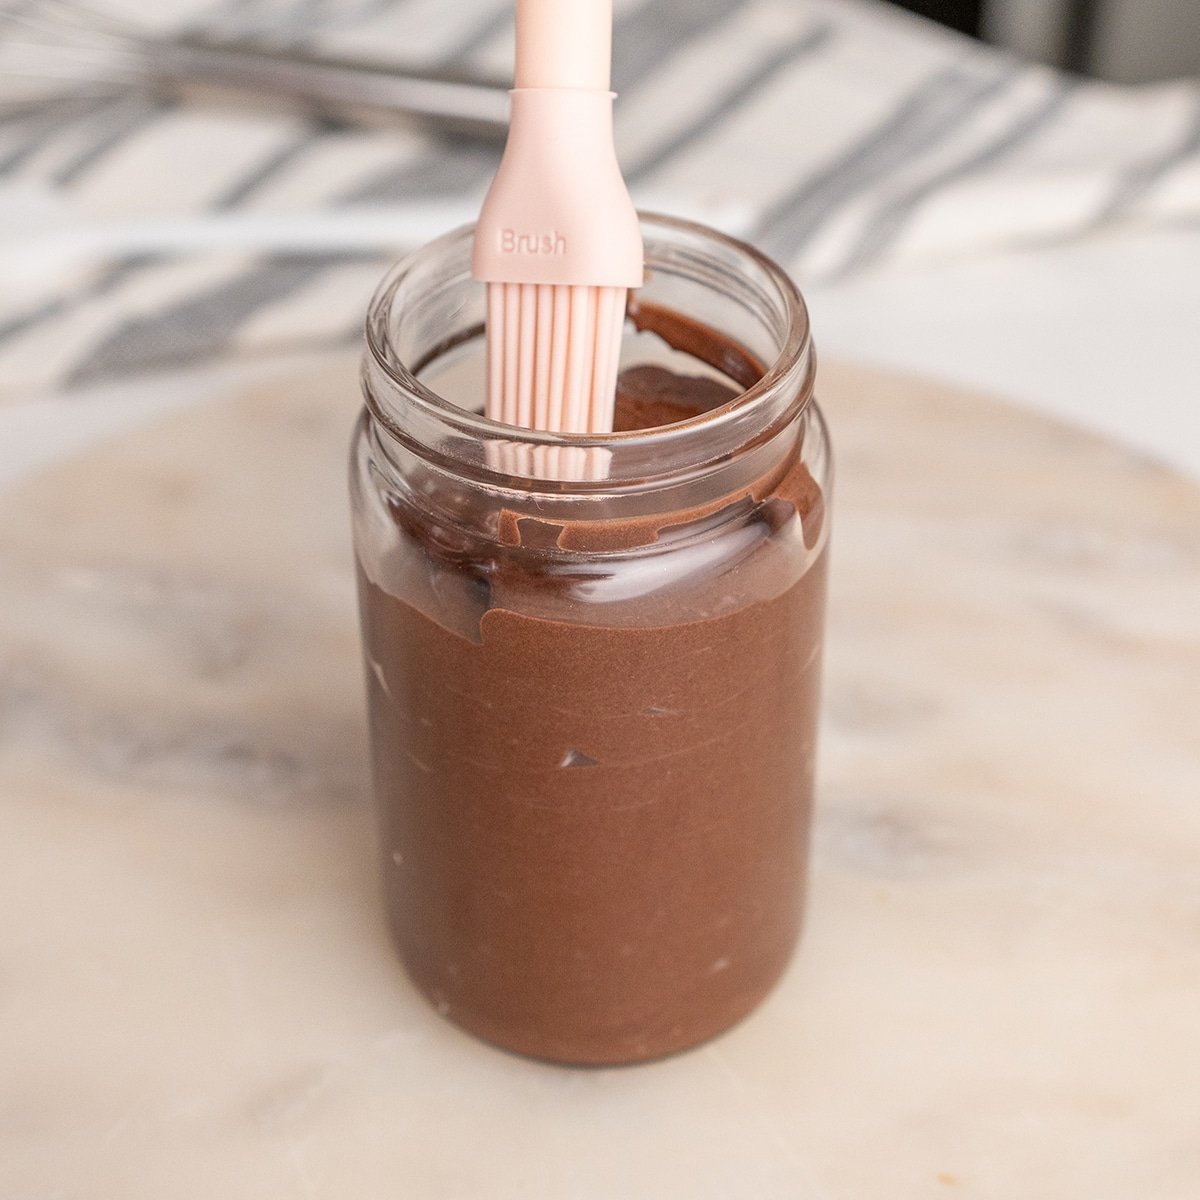 chocolate cake goop in a jar with a silicone brush